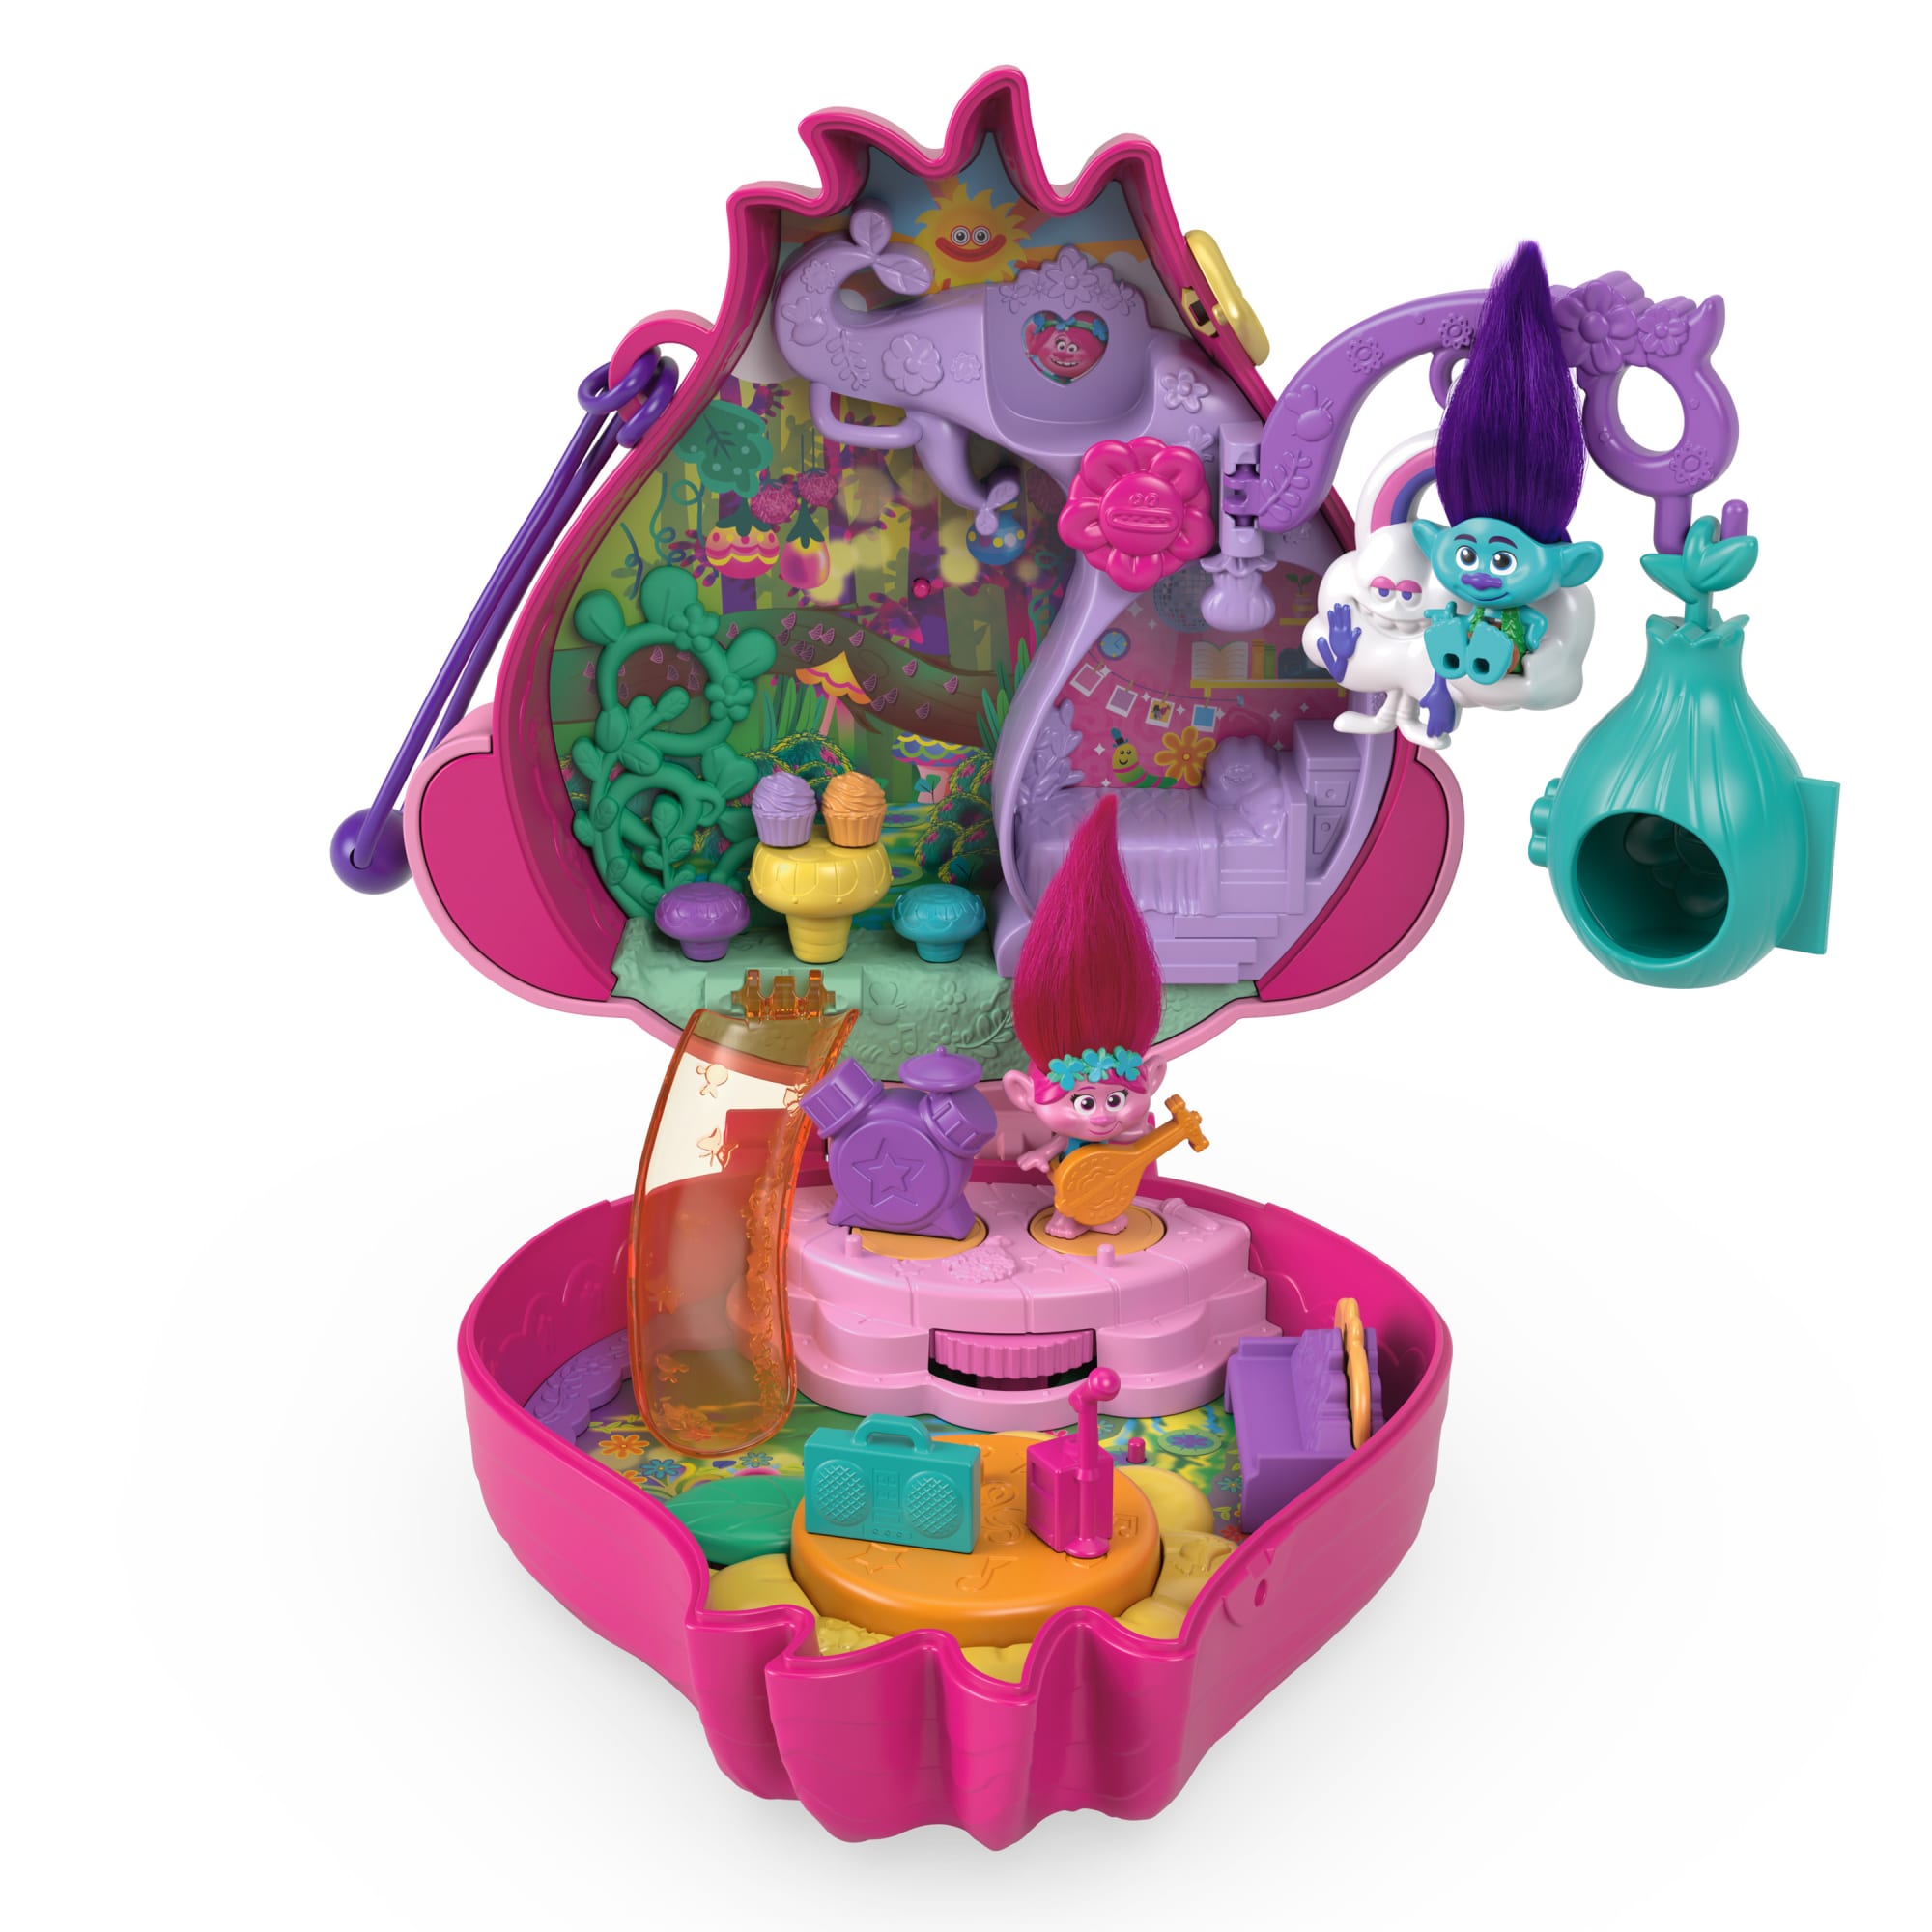 Polly Pocket Playset | DreamWorks Trolls Compact with 2 Dolls